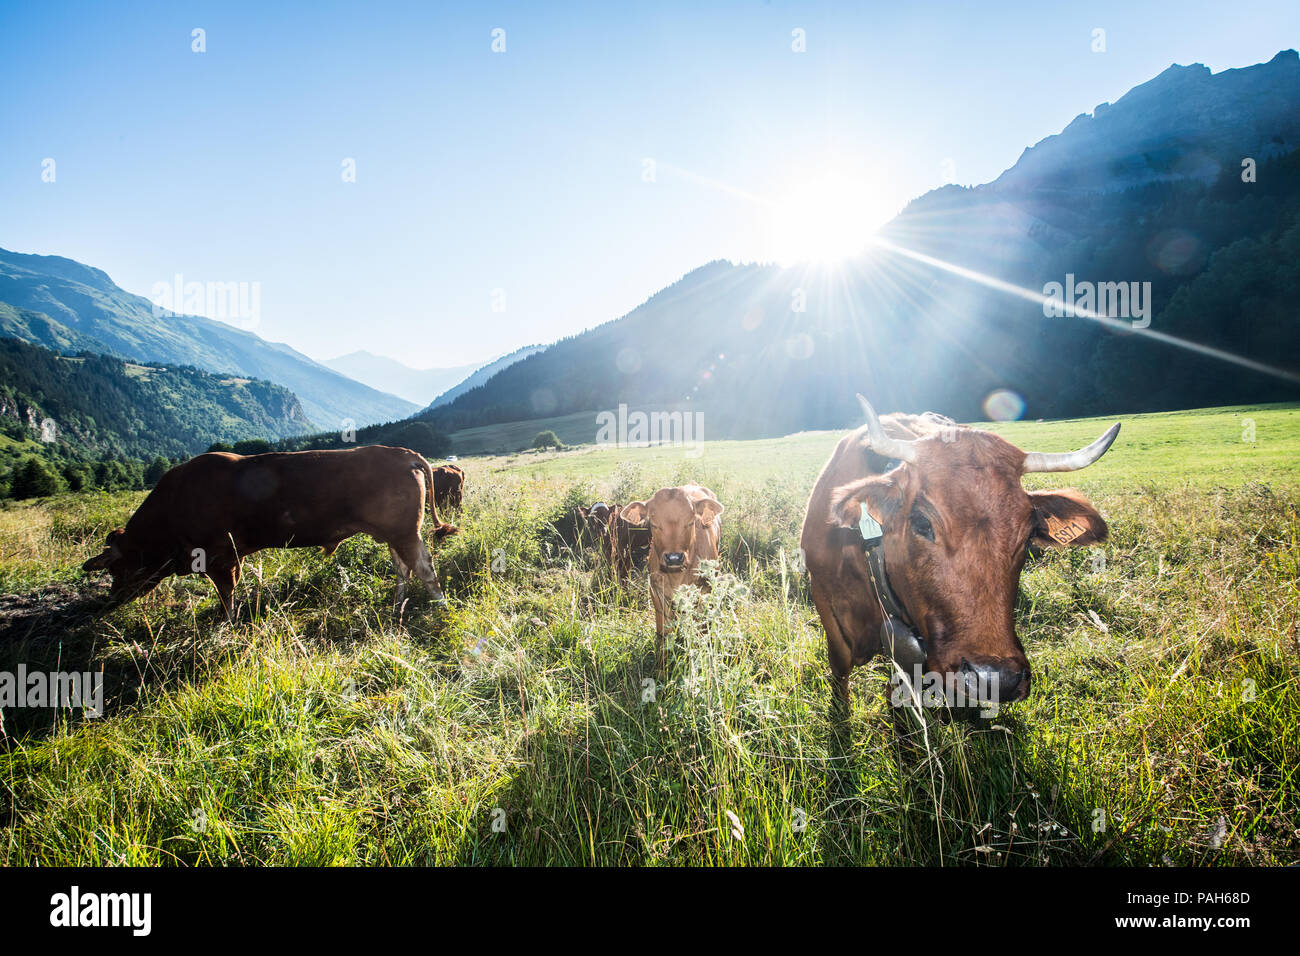 Landscape in the french alps near Alberville. Stock Photo